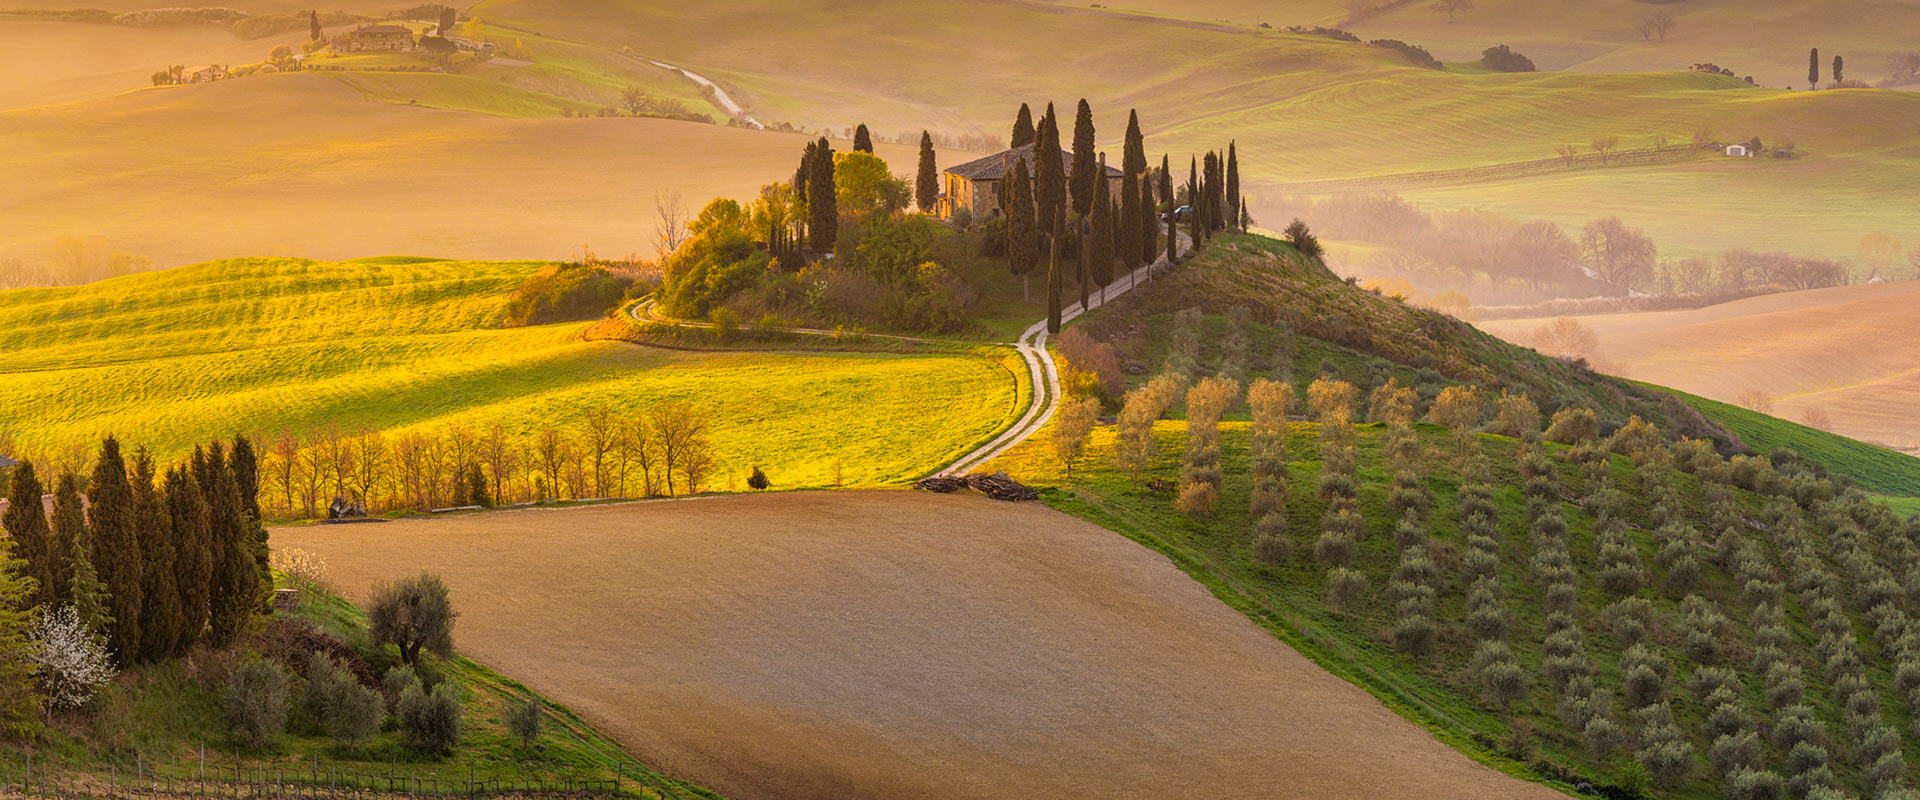 GettyImages 950438726 Tuscany Header